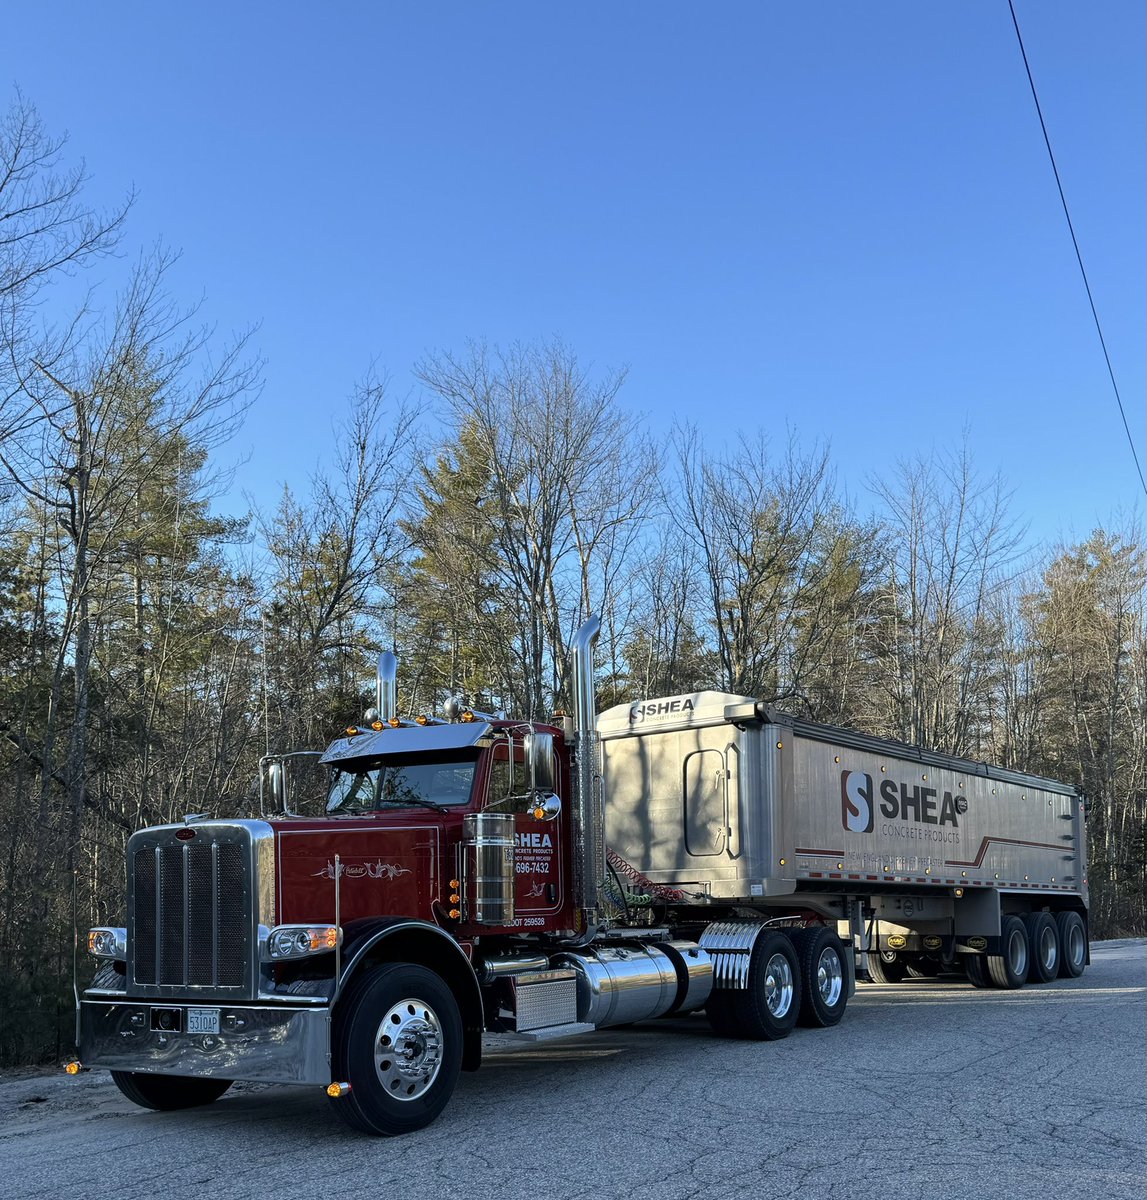 What a beauty 🇺🇸 … Our @PeterbiltMotors & @MACTrailerMFG combo is having a day ☀️ … Teamwork makes the dream work #february2024 #precastconcrete #thesheaway #peterbilt #mactrailer #madeintheusa🇺🇸 #teamworkmakesthedreamwork